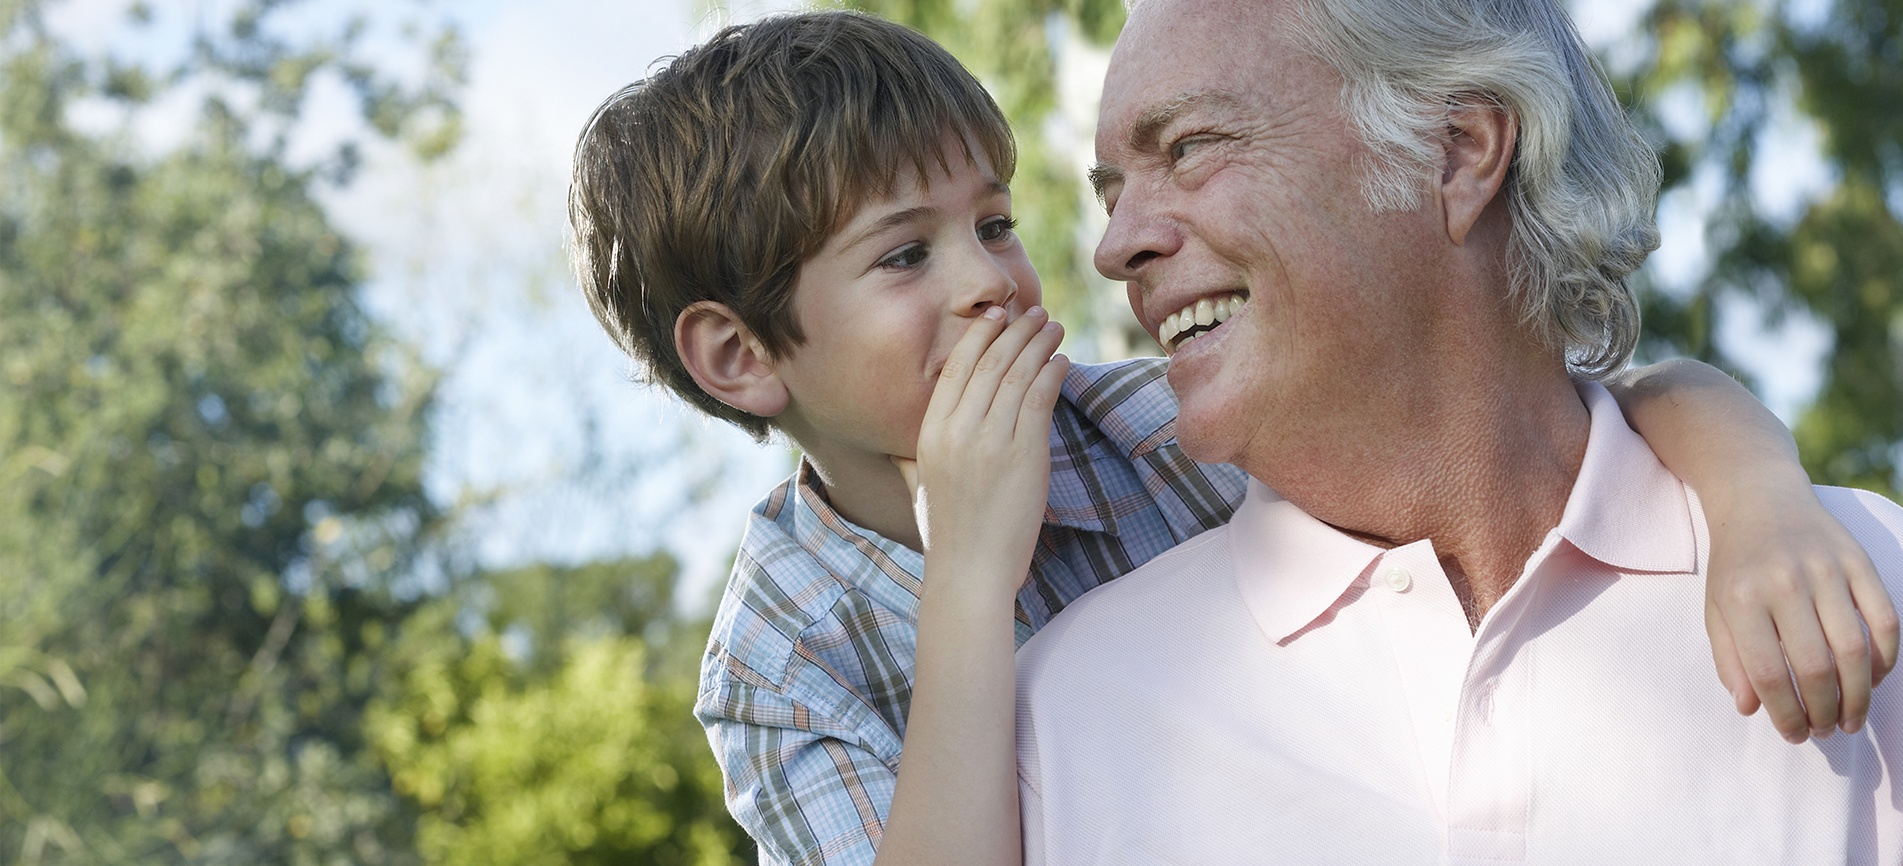 A happy grandfather and grandson bond in a lush park setting